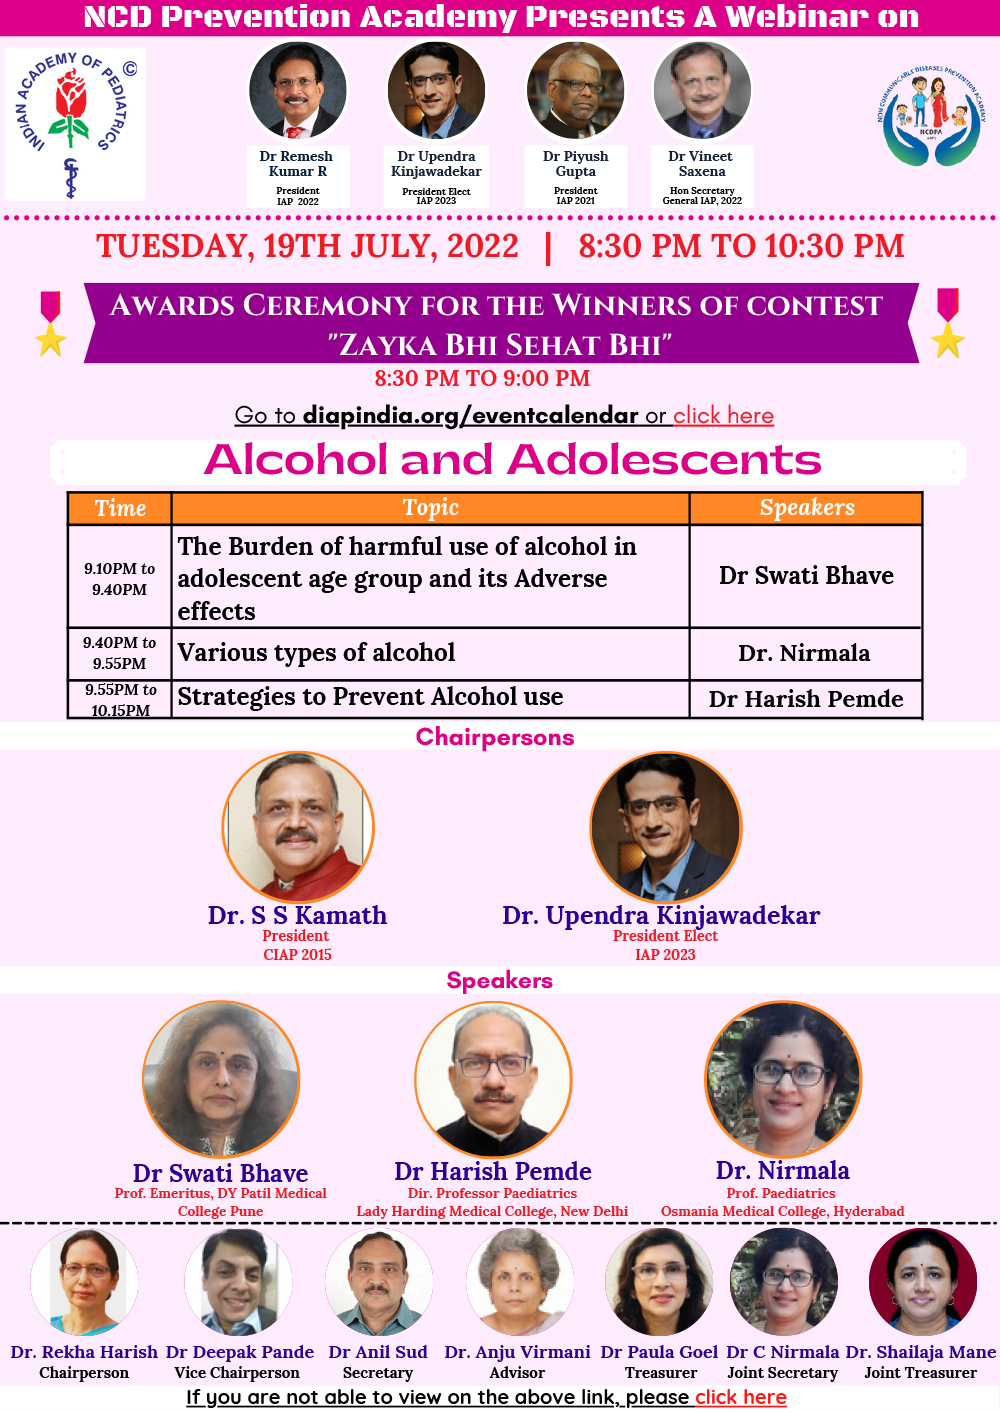 IAP Non-Communicable Diseases Chapter, Alcohol and Adolescents